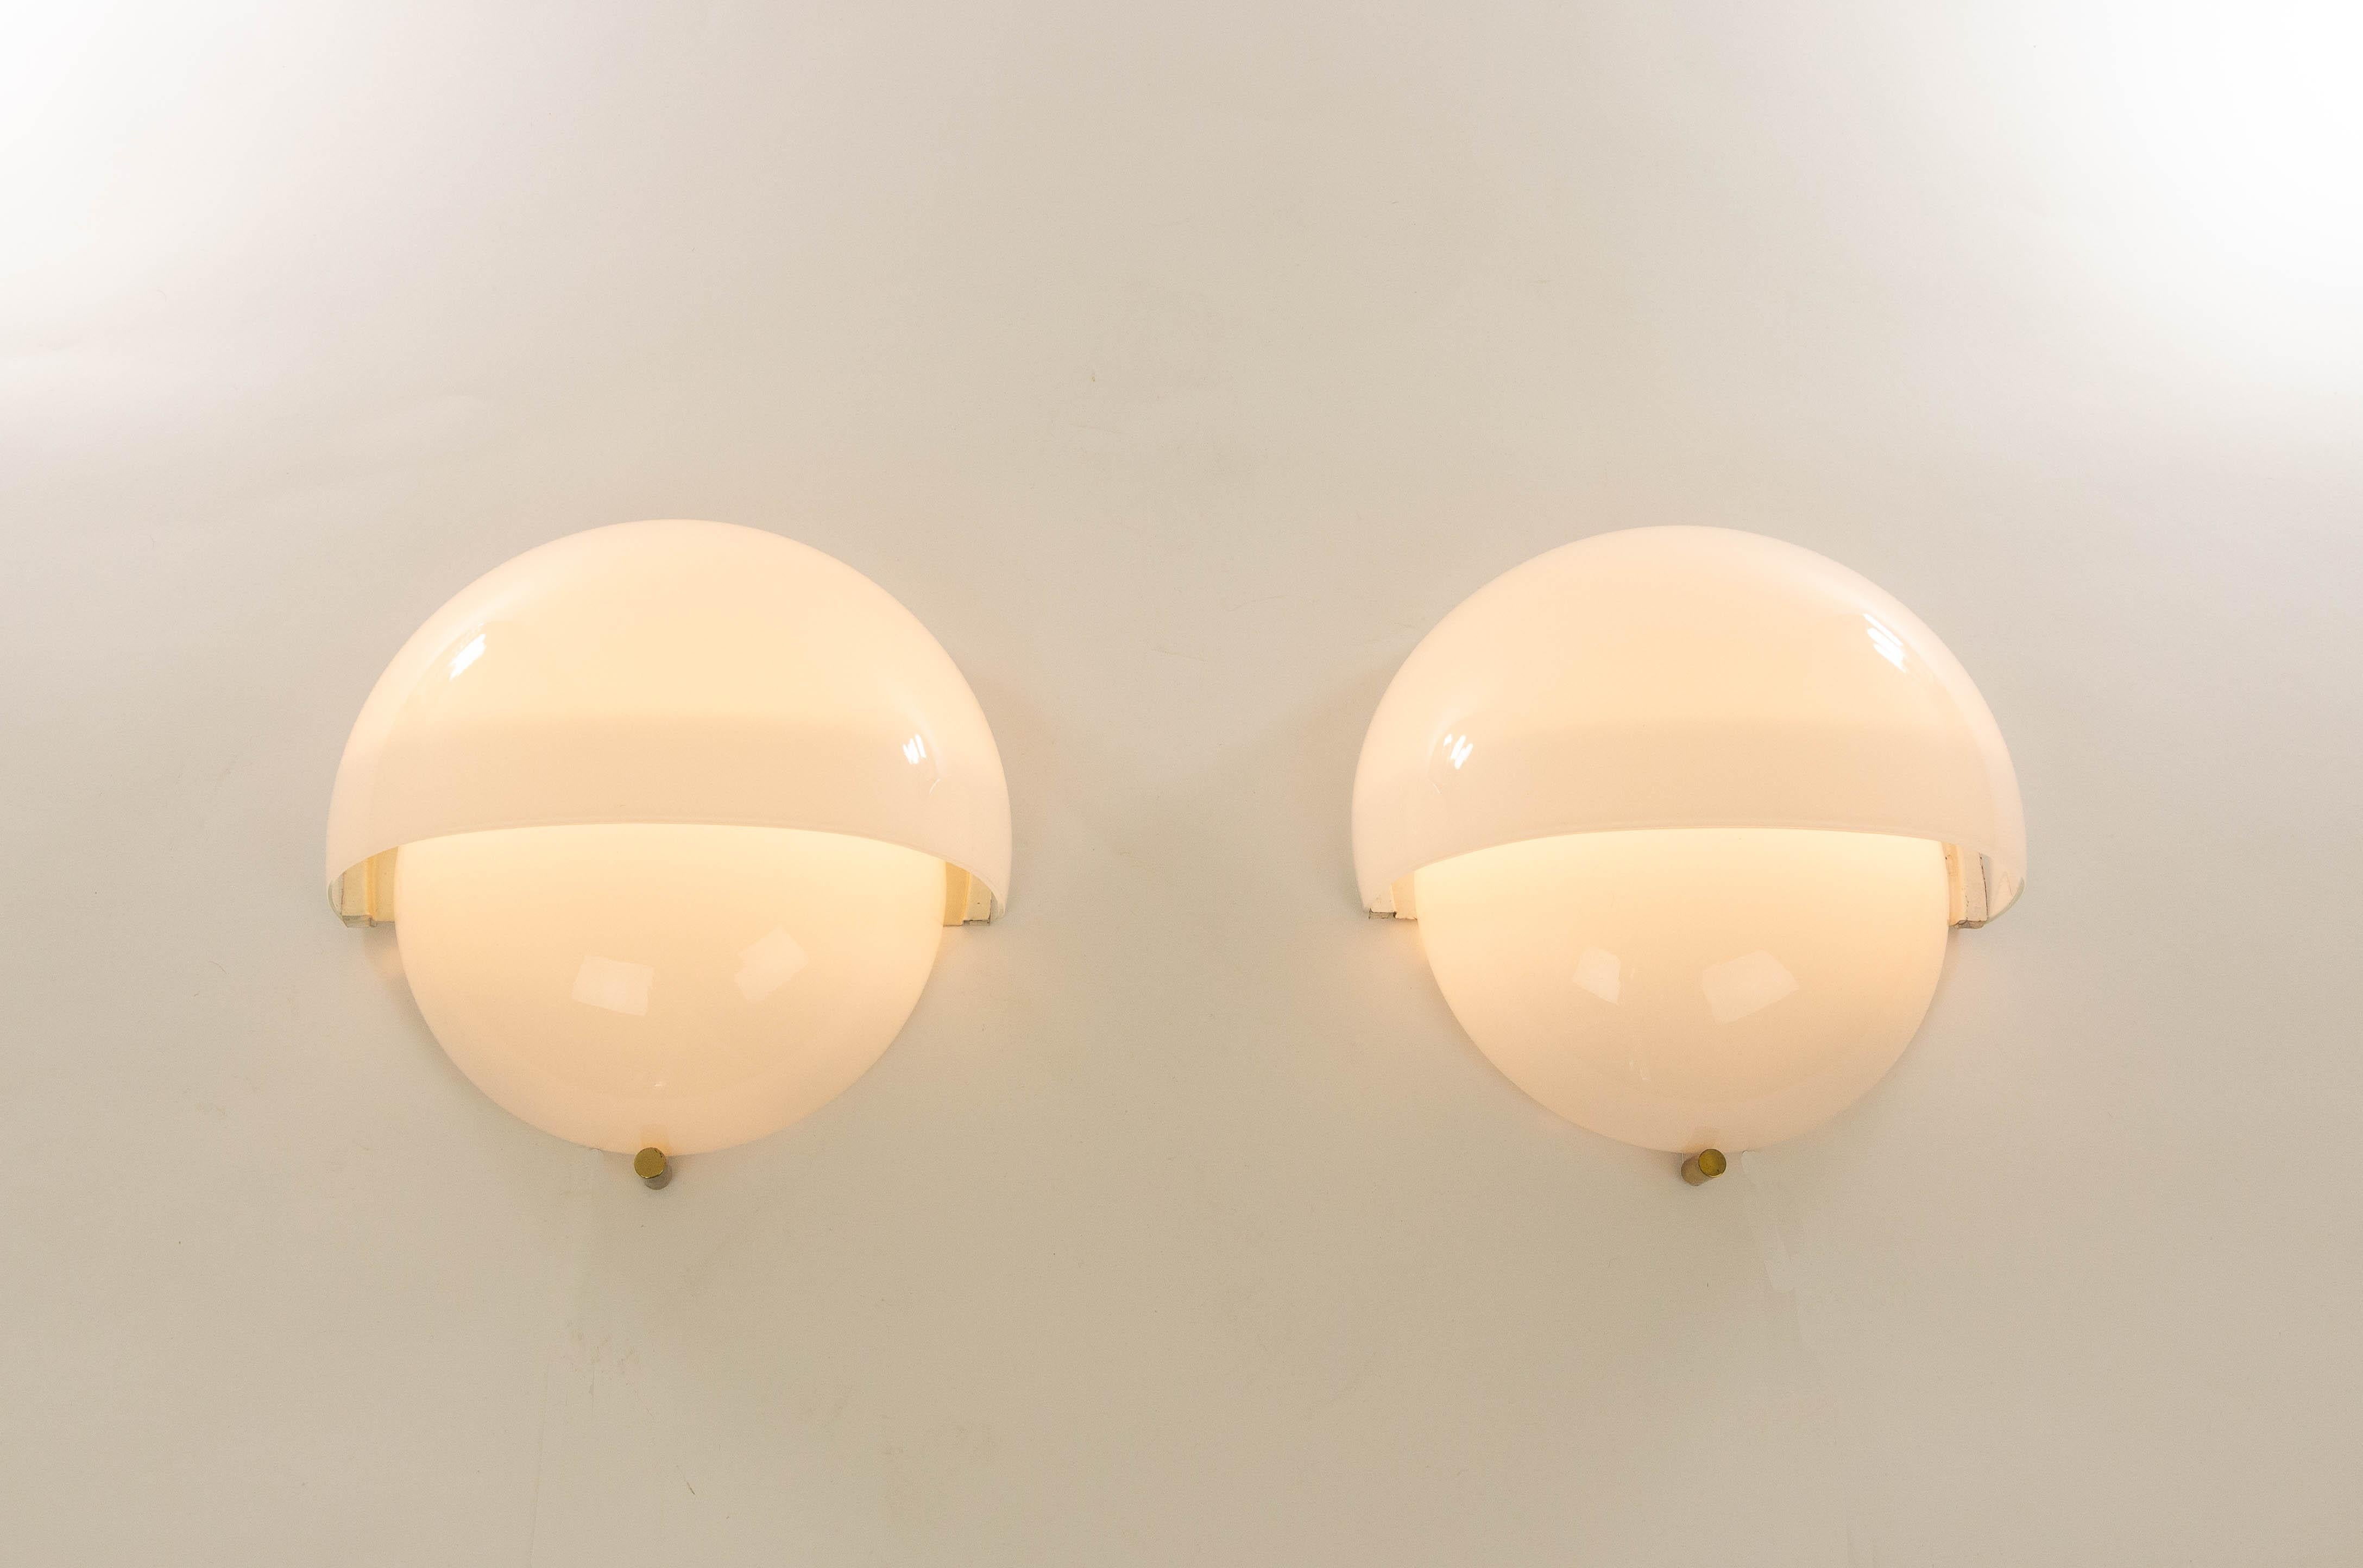 A pair of Grande Mania wall lamps designed by Vico Magistretti and produced by Artemide in 1963.

This is the original version, made of two opaline glass shells and with a very nice brass detail at the bottom of the lamp.

Both lamps are in very